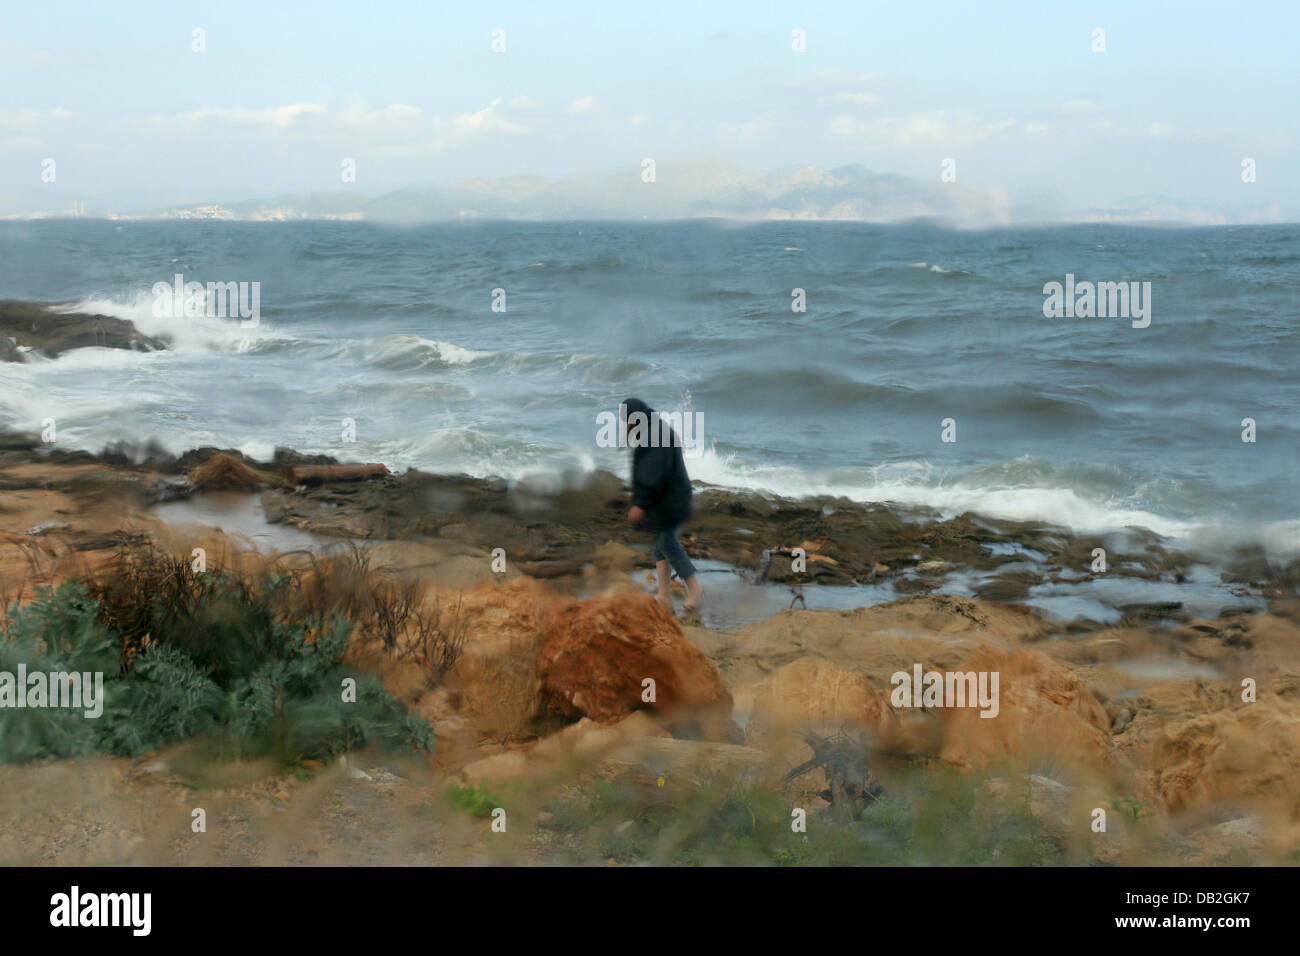 Despite stormy weather a person takes a walk at the agitated bay of Alcudia on Majorca, Spain, 18 October 2007. Photo: Heiko Wolfraum Stock Photo